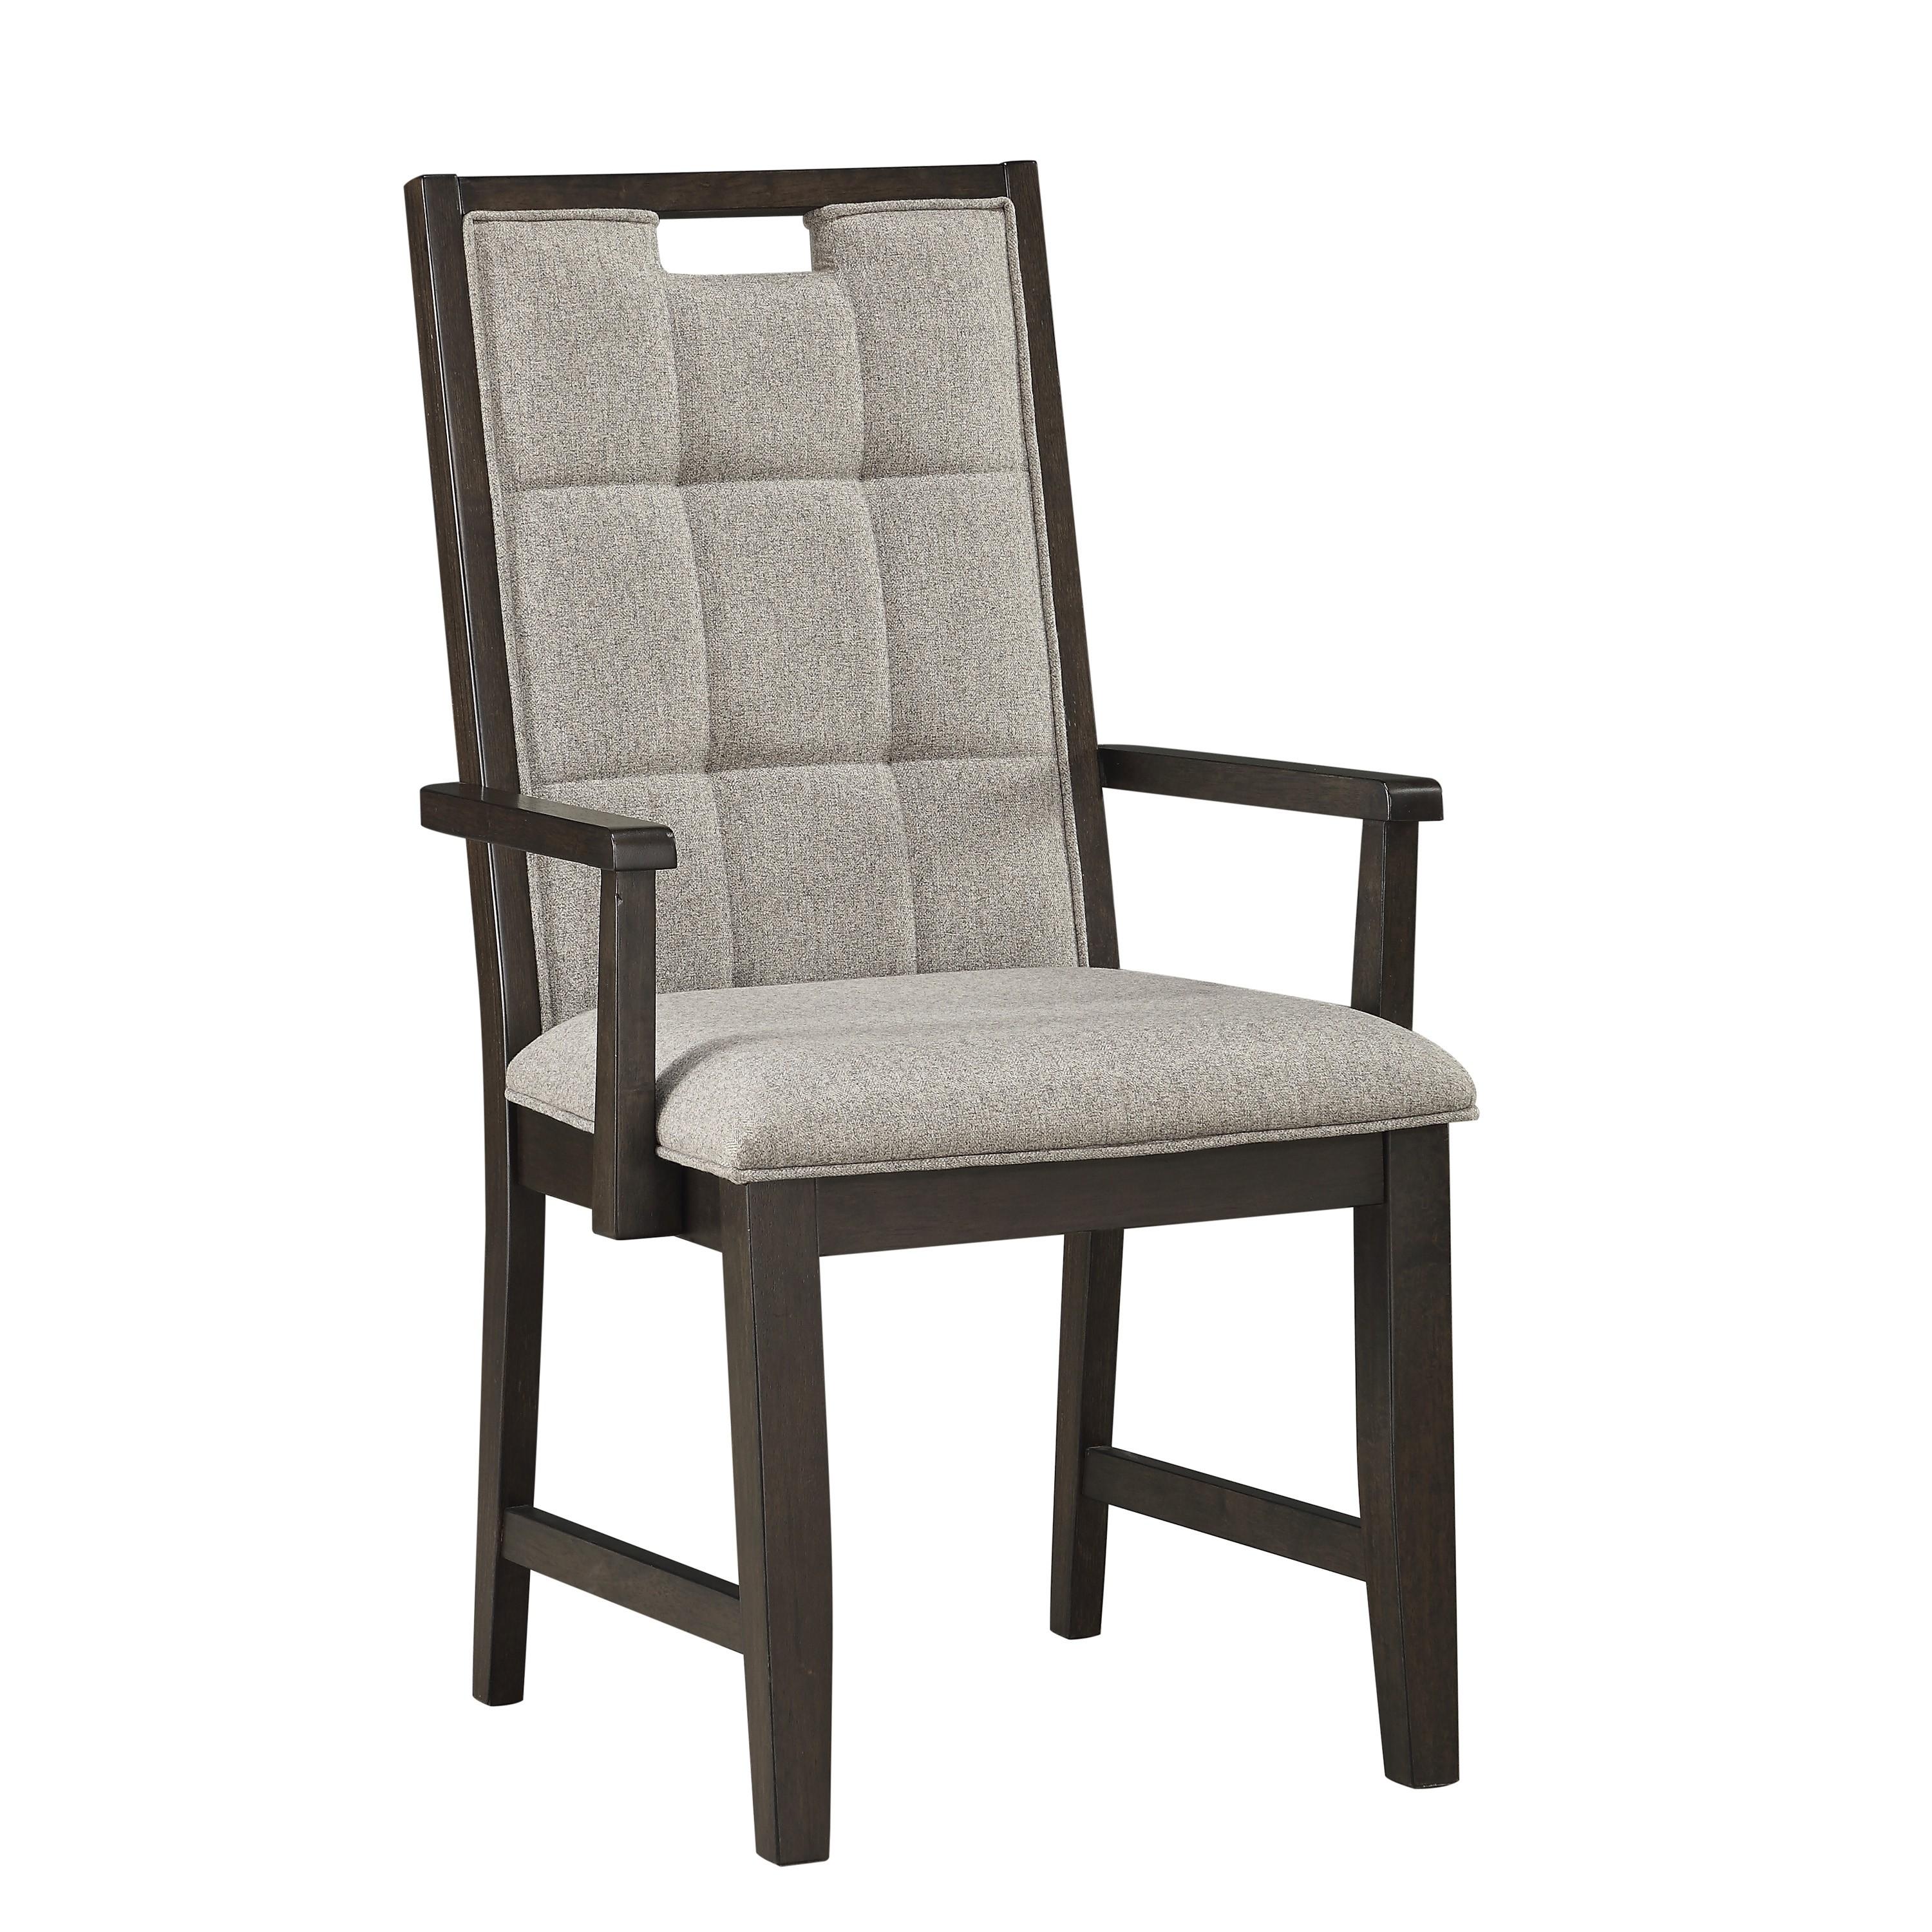 Transitional Arm Chair Set 5654A Rathdrum 5654A in Dark Oak Polyester